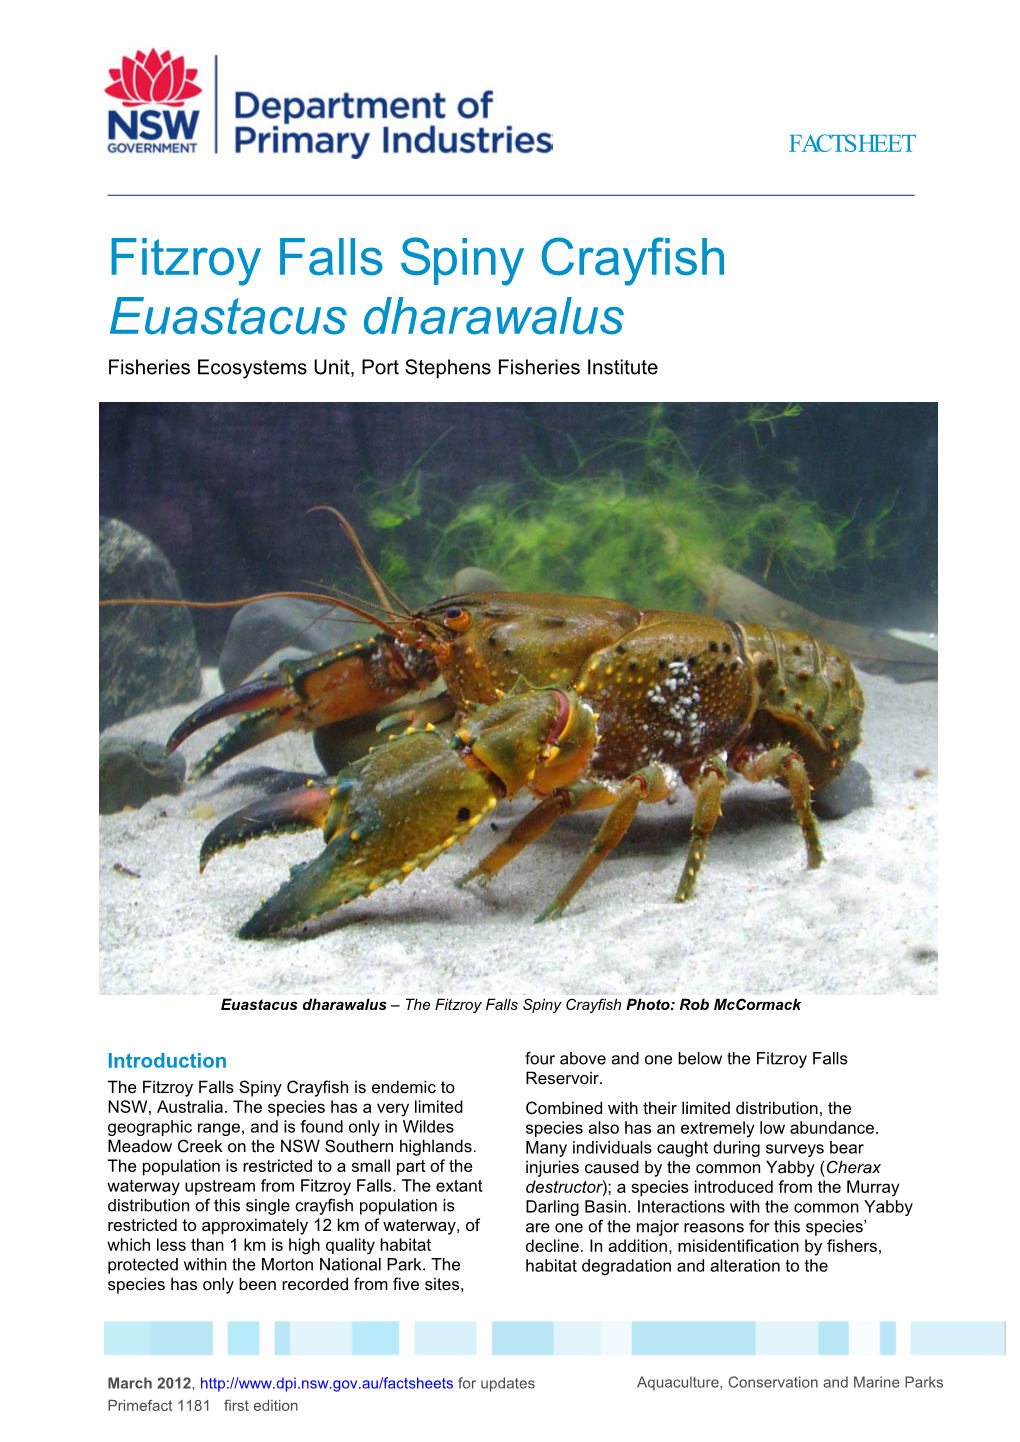 Fitzroy Falls Spiny Crayfish Euastacus Dharawalus Fisheries Ecosystems Unit, Port Stephens Fisheries Institute